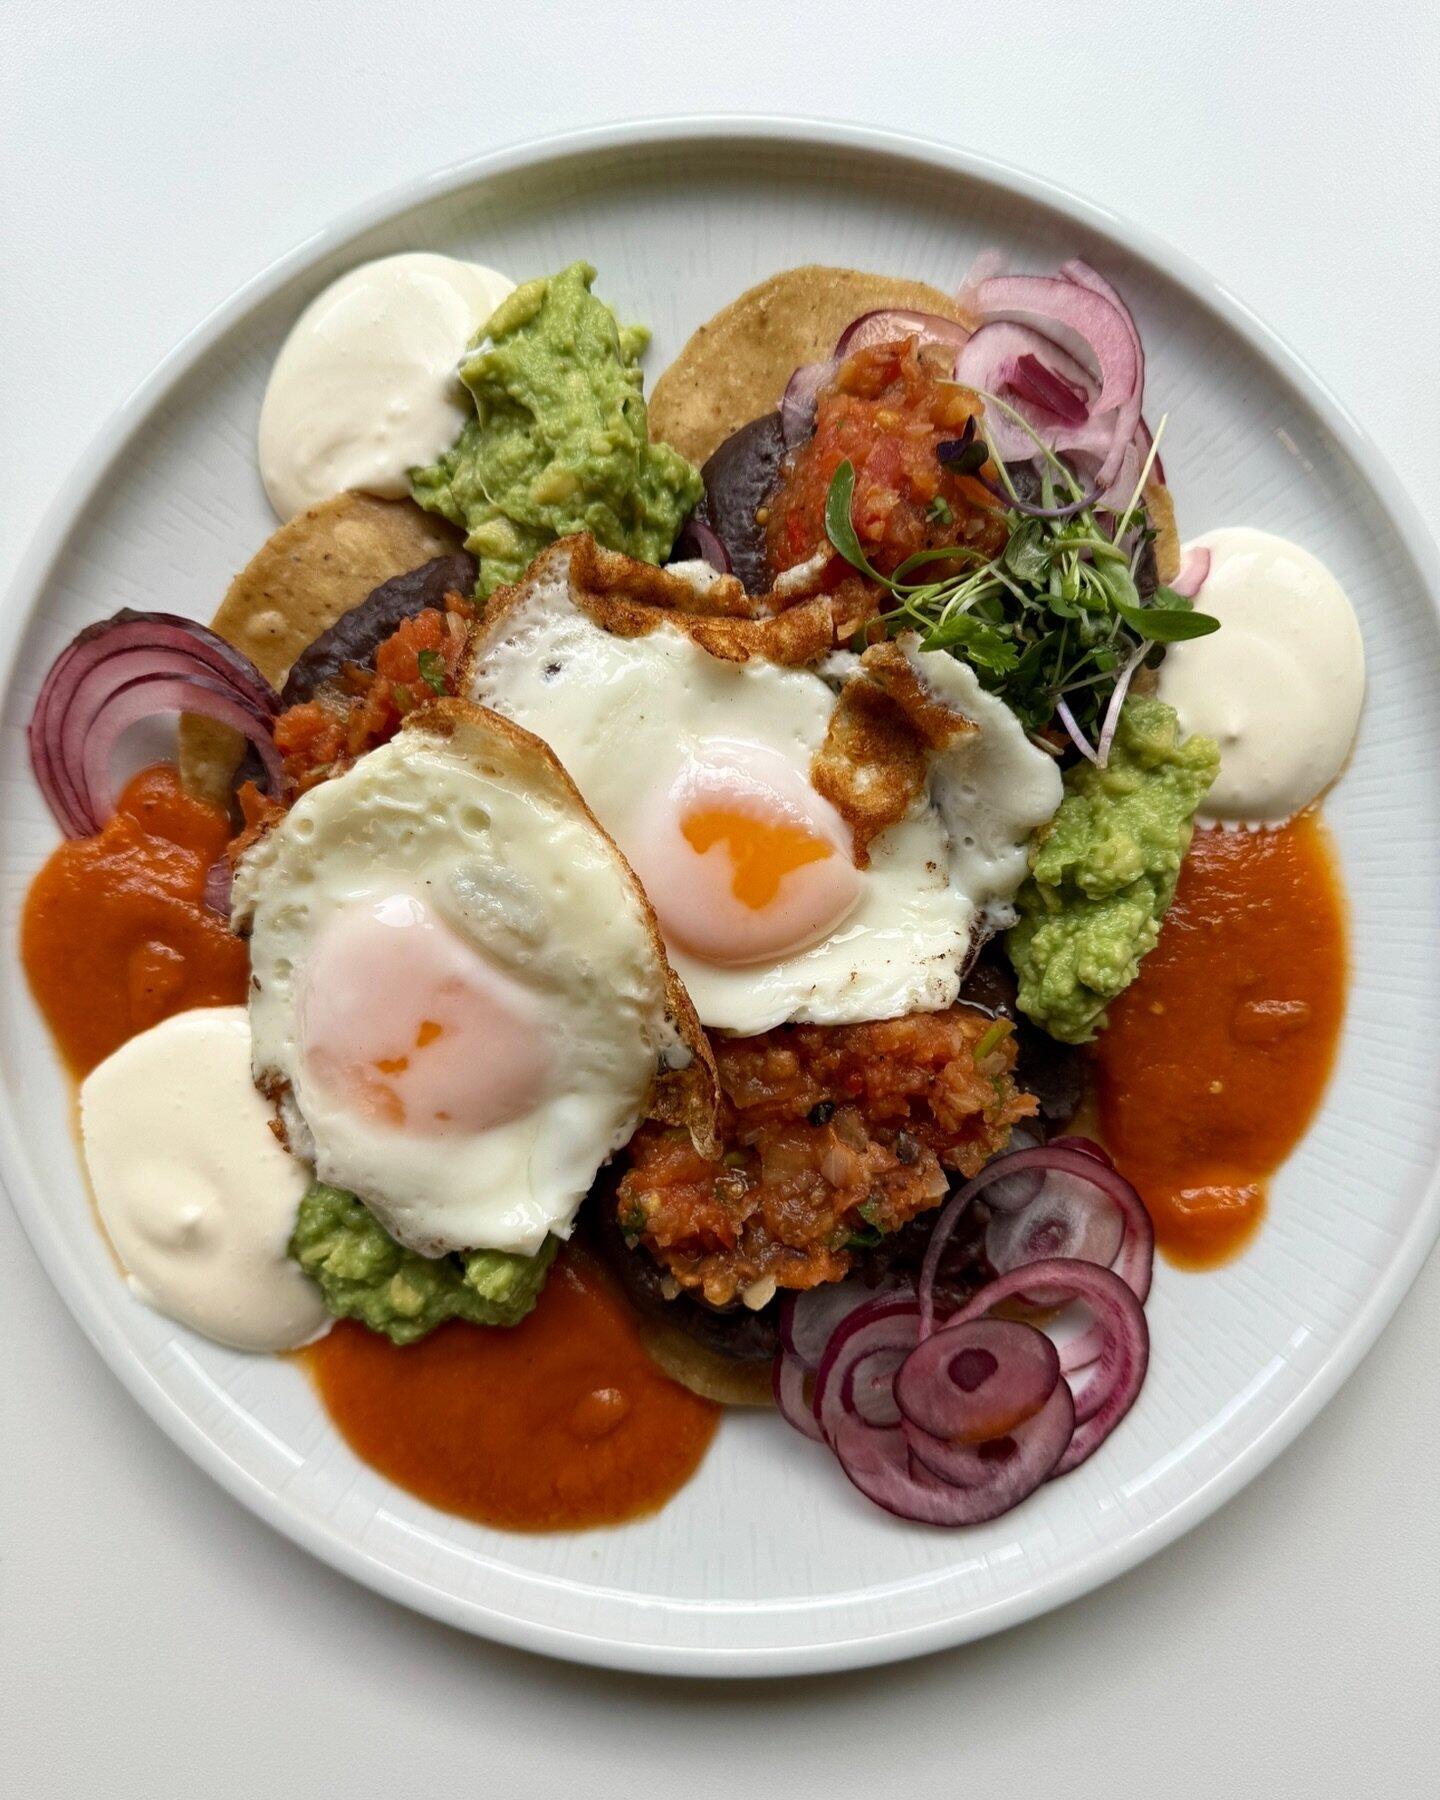 Open all weekend including the bank holiday Monday from 10am for Brunch 😘

📸 Huevos rancheros 🍳 🥑 🌶️ @krahsnori 🇸🇻